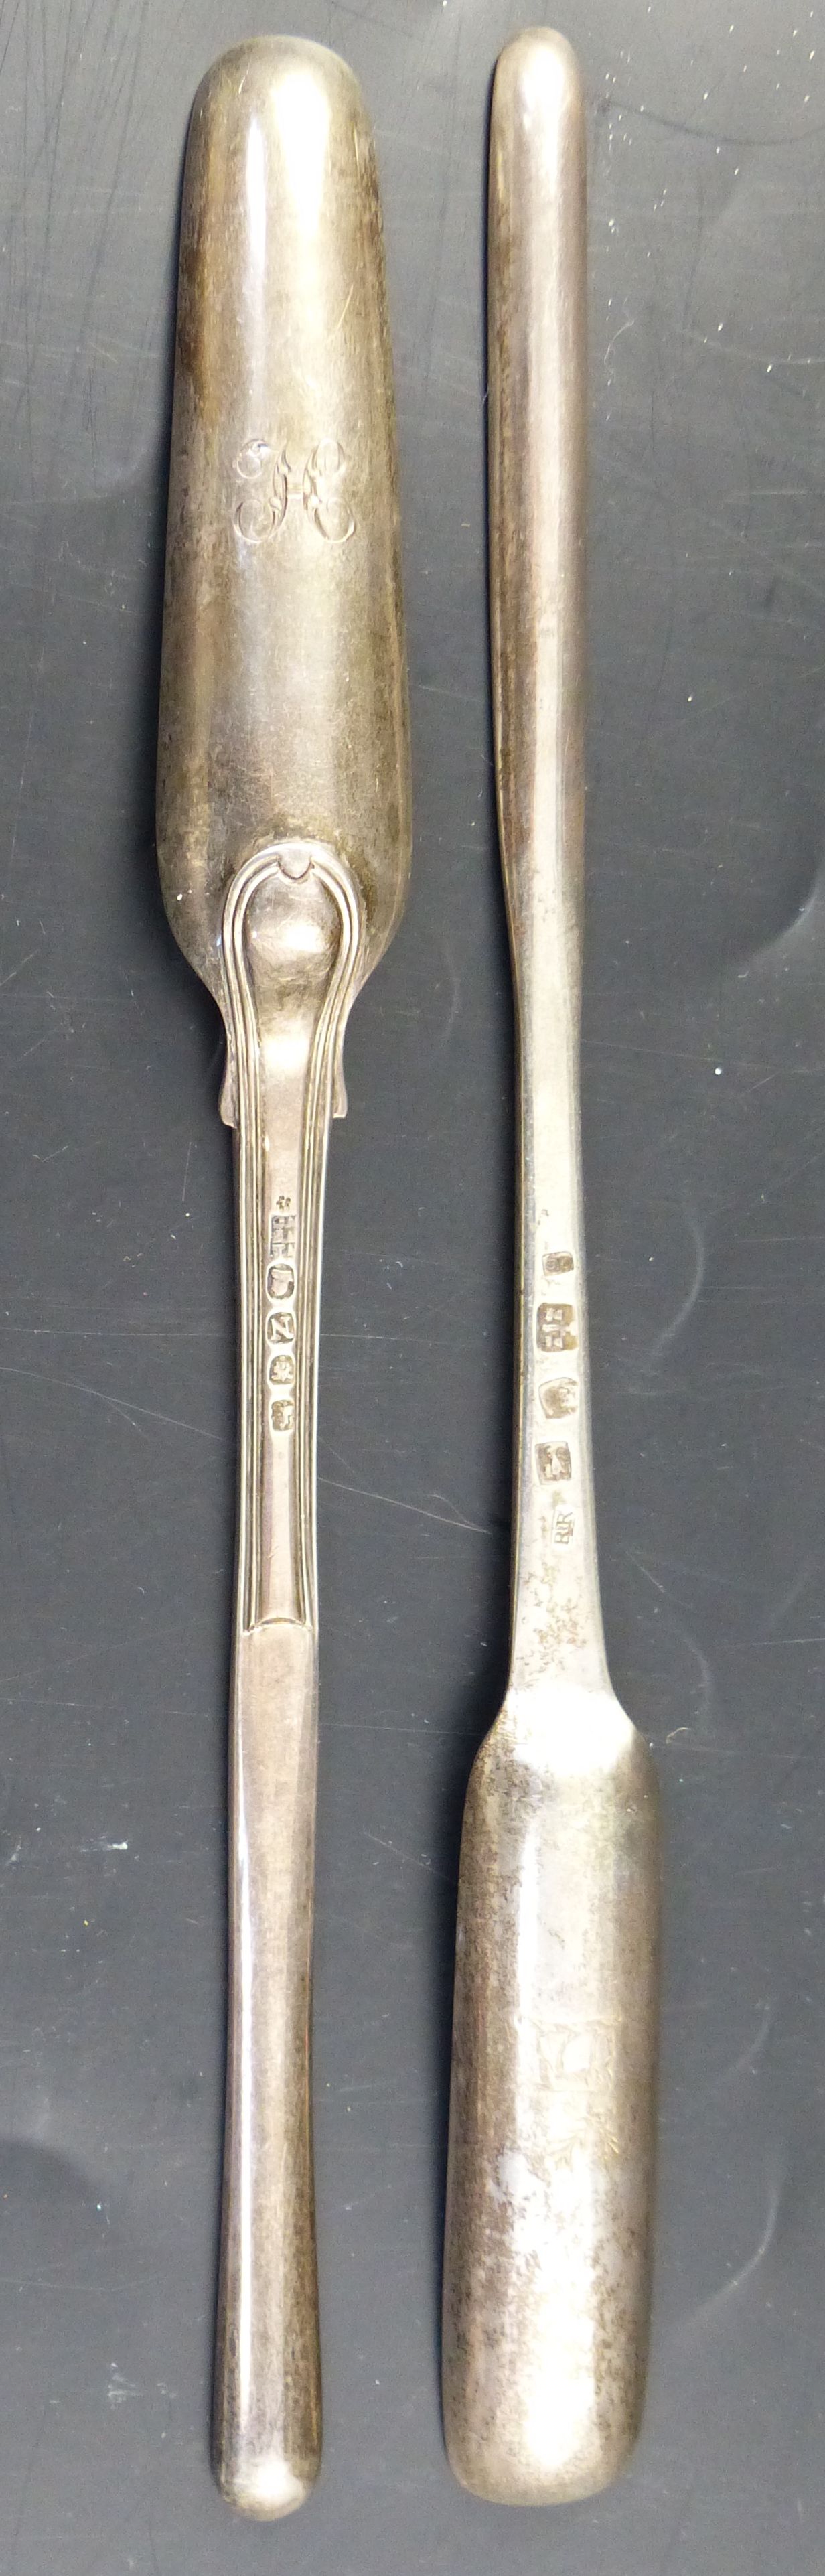 Two 19th century silver marrow scoops, thread pattern by Eley, Fearn & Chawner, London, 1808 and Chester, 1782